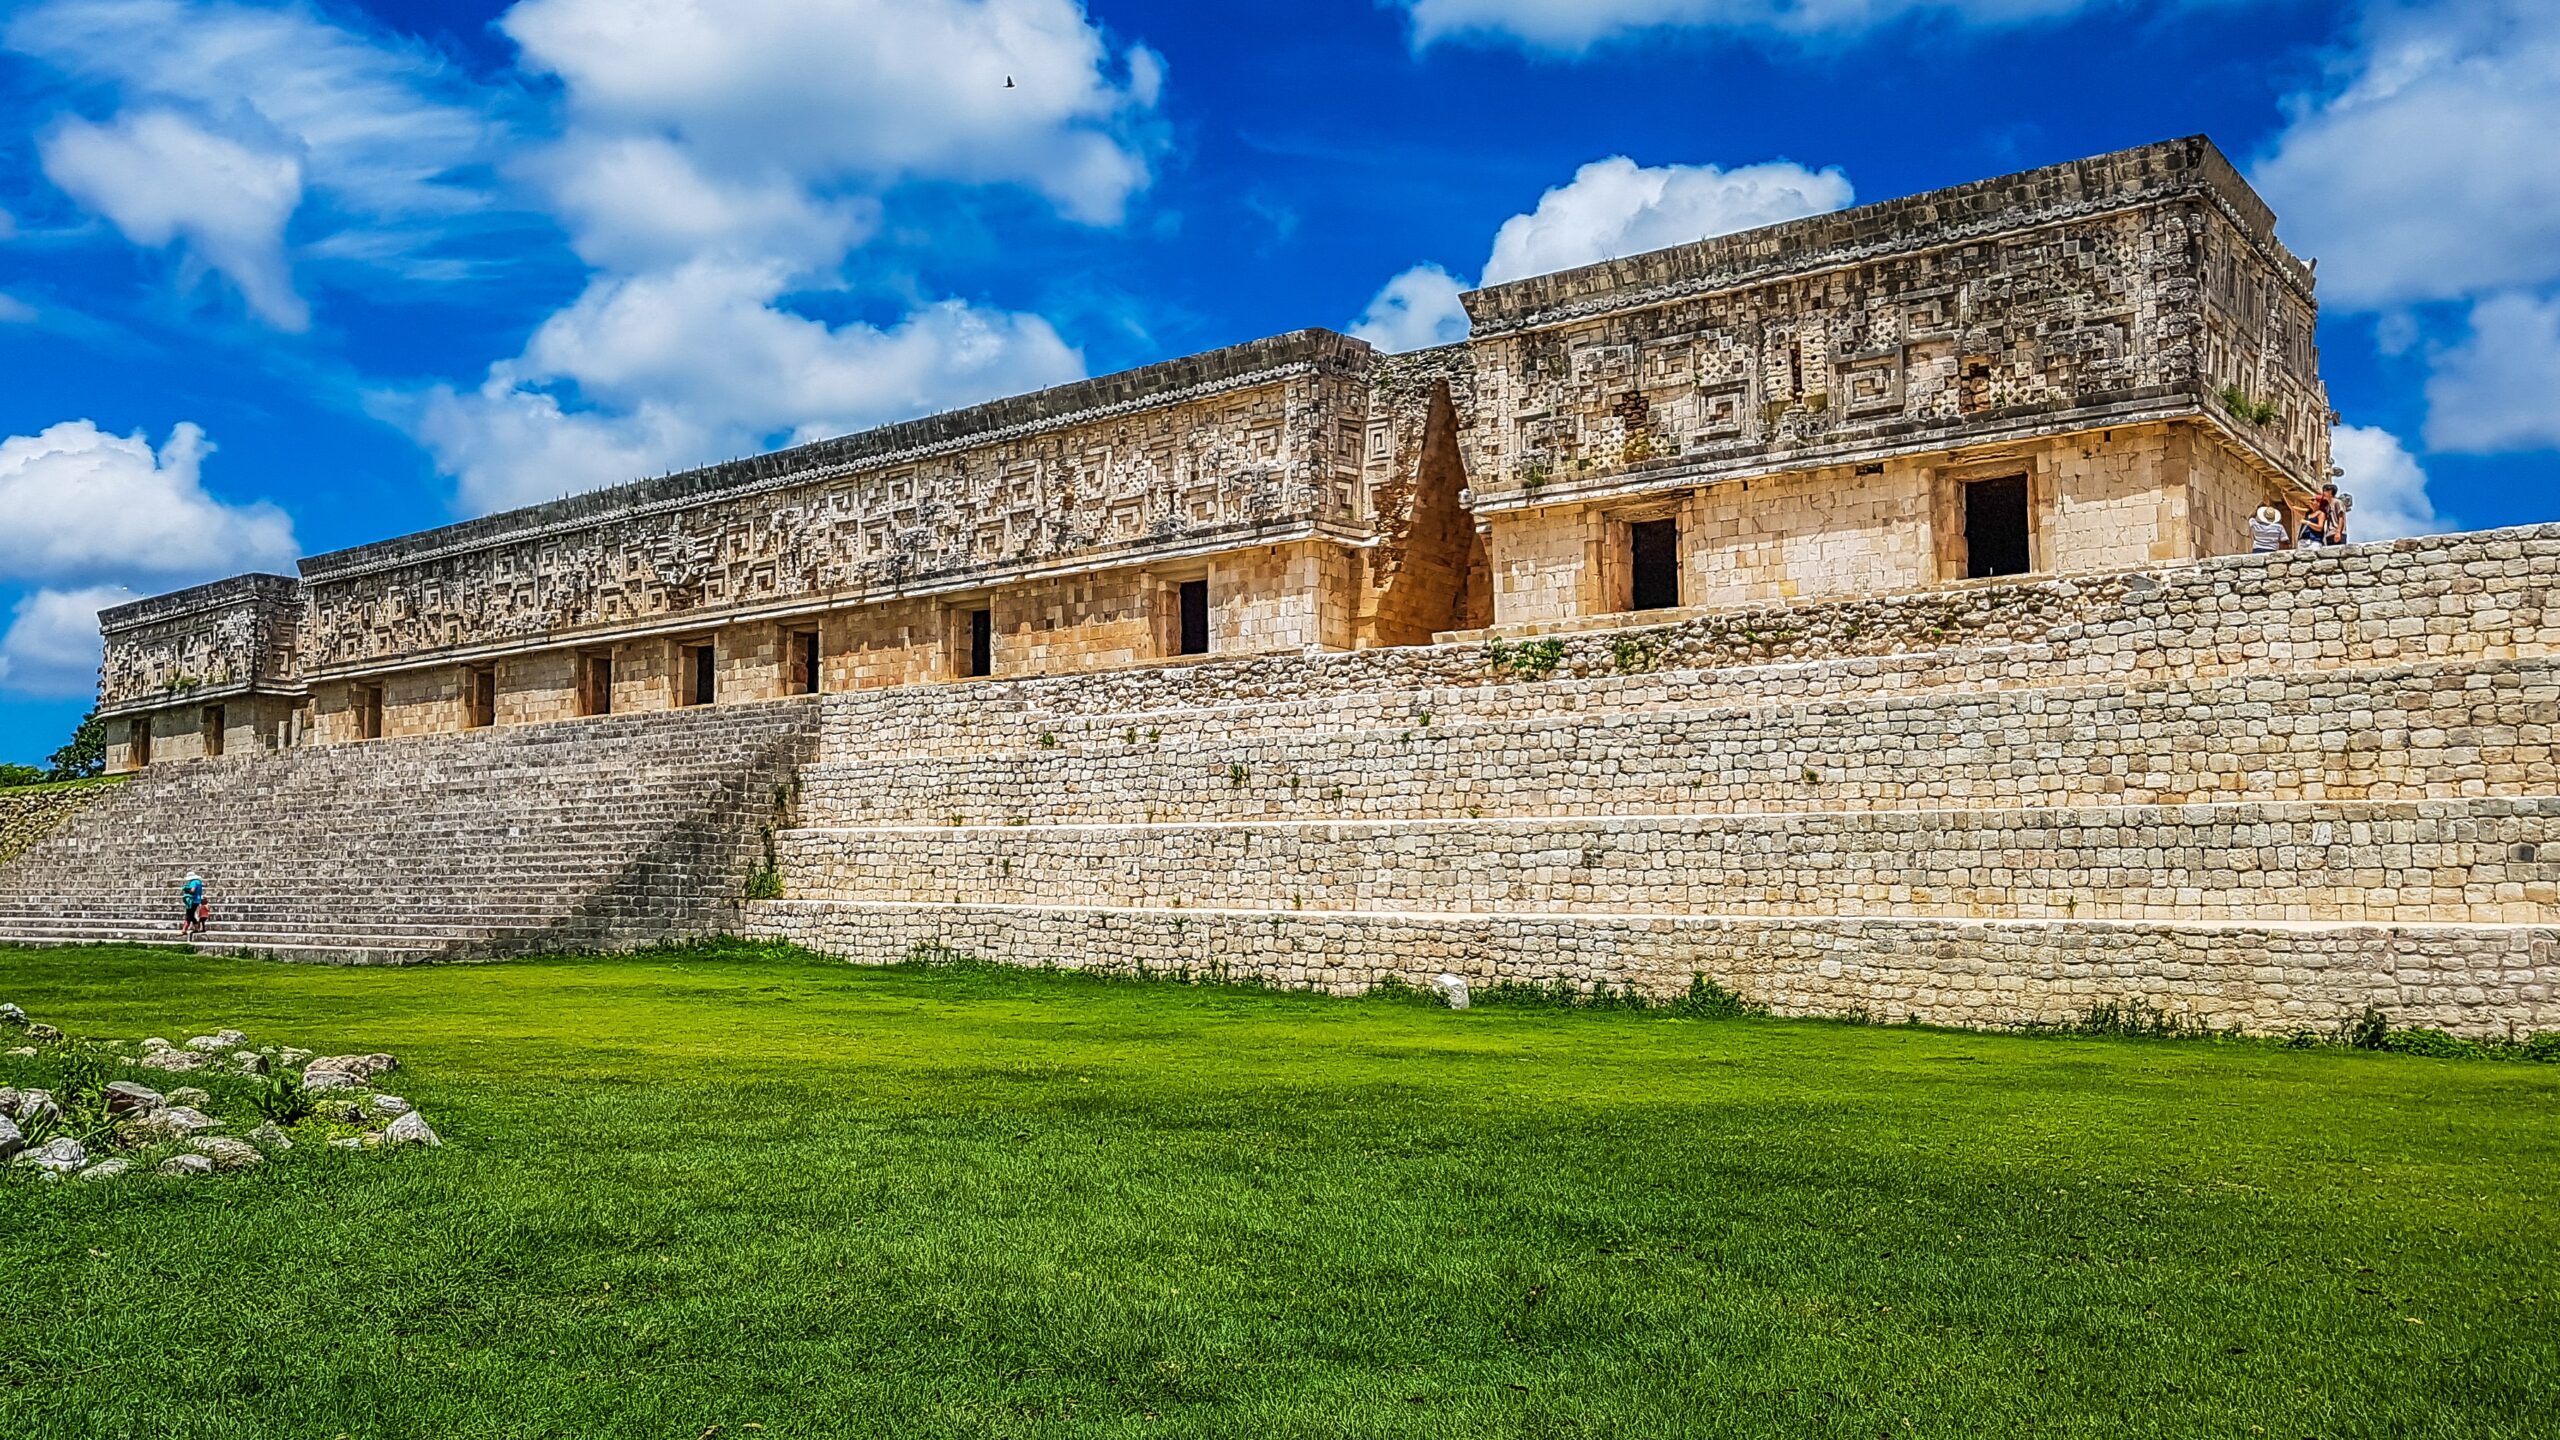 Uxmal is home to the Pyramid of the Magician in Mexico.
pictrured: The legendary Uxmal ruins on a bright cloudy day